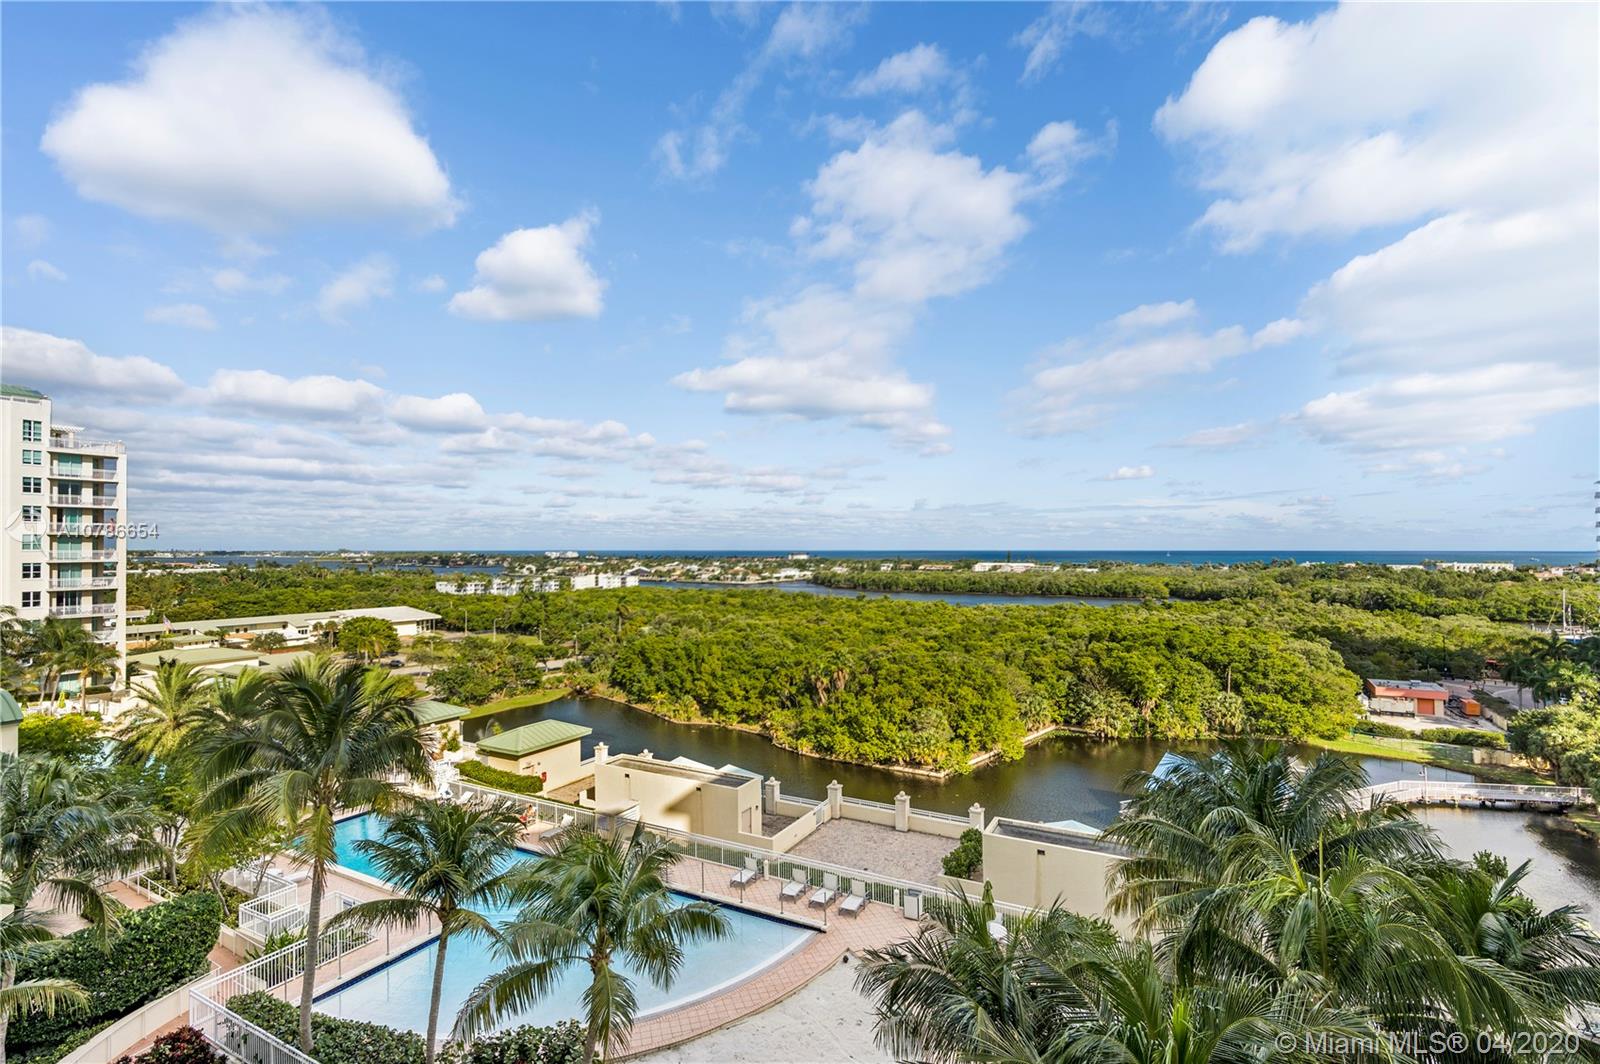 Elegantly reimagined, this remodeled 2bedroom /2bathroom corner unit is located at the coveted Palm Bay Yacht Club.